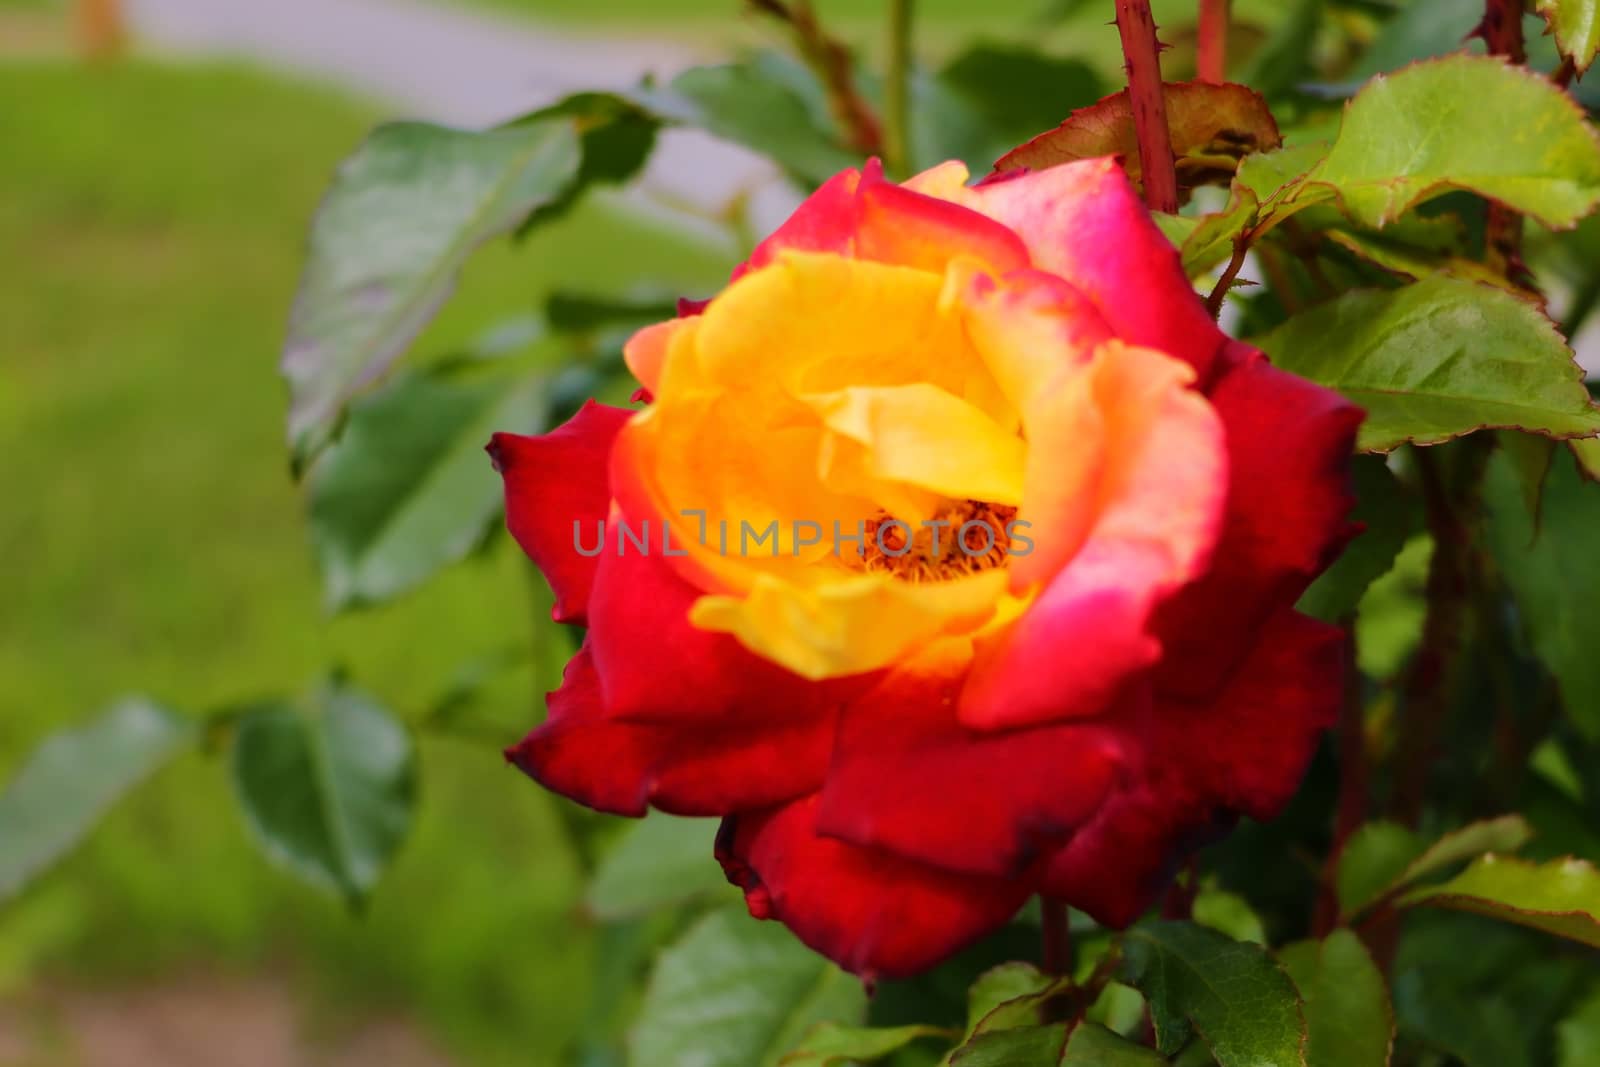 Macro, shallow depth of field image of a single red and yellow rose